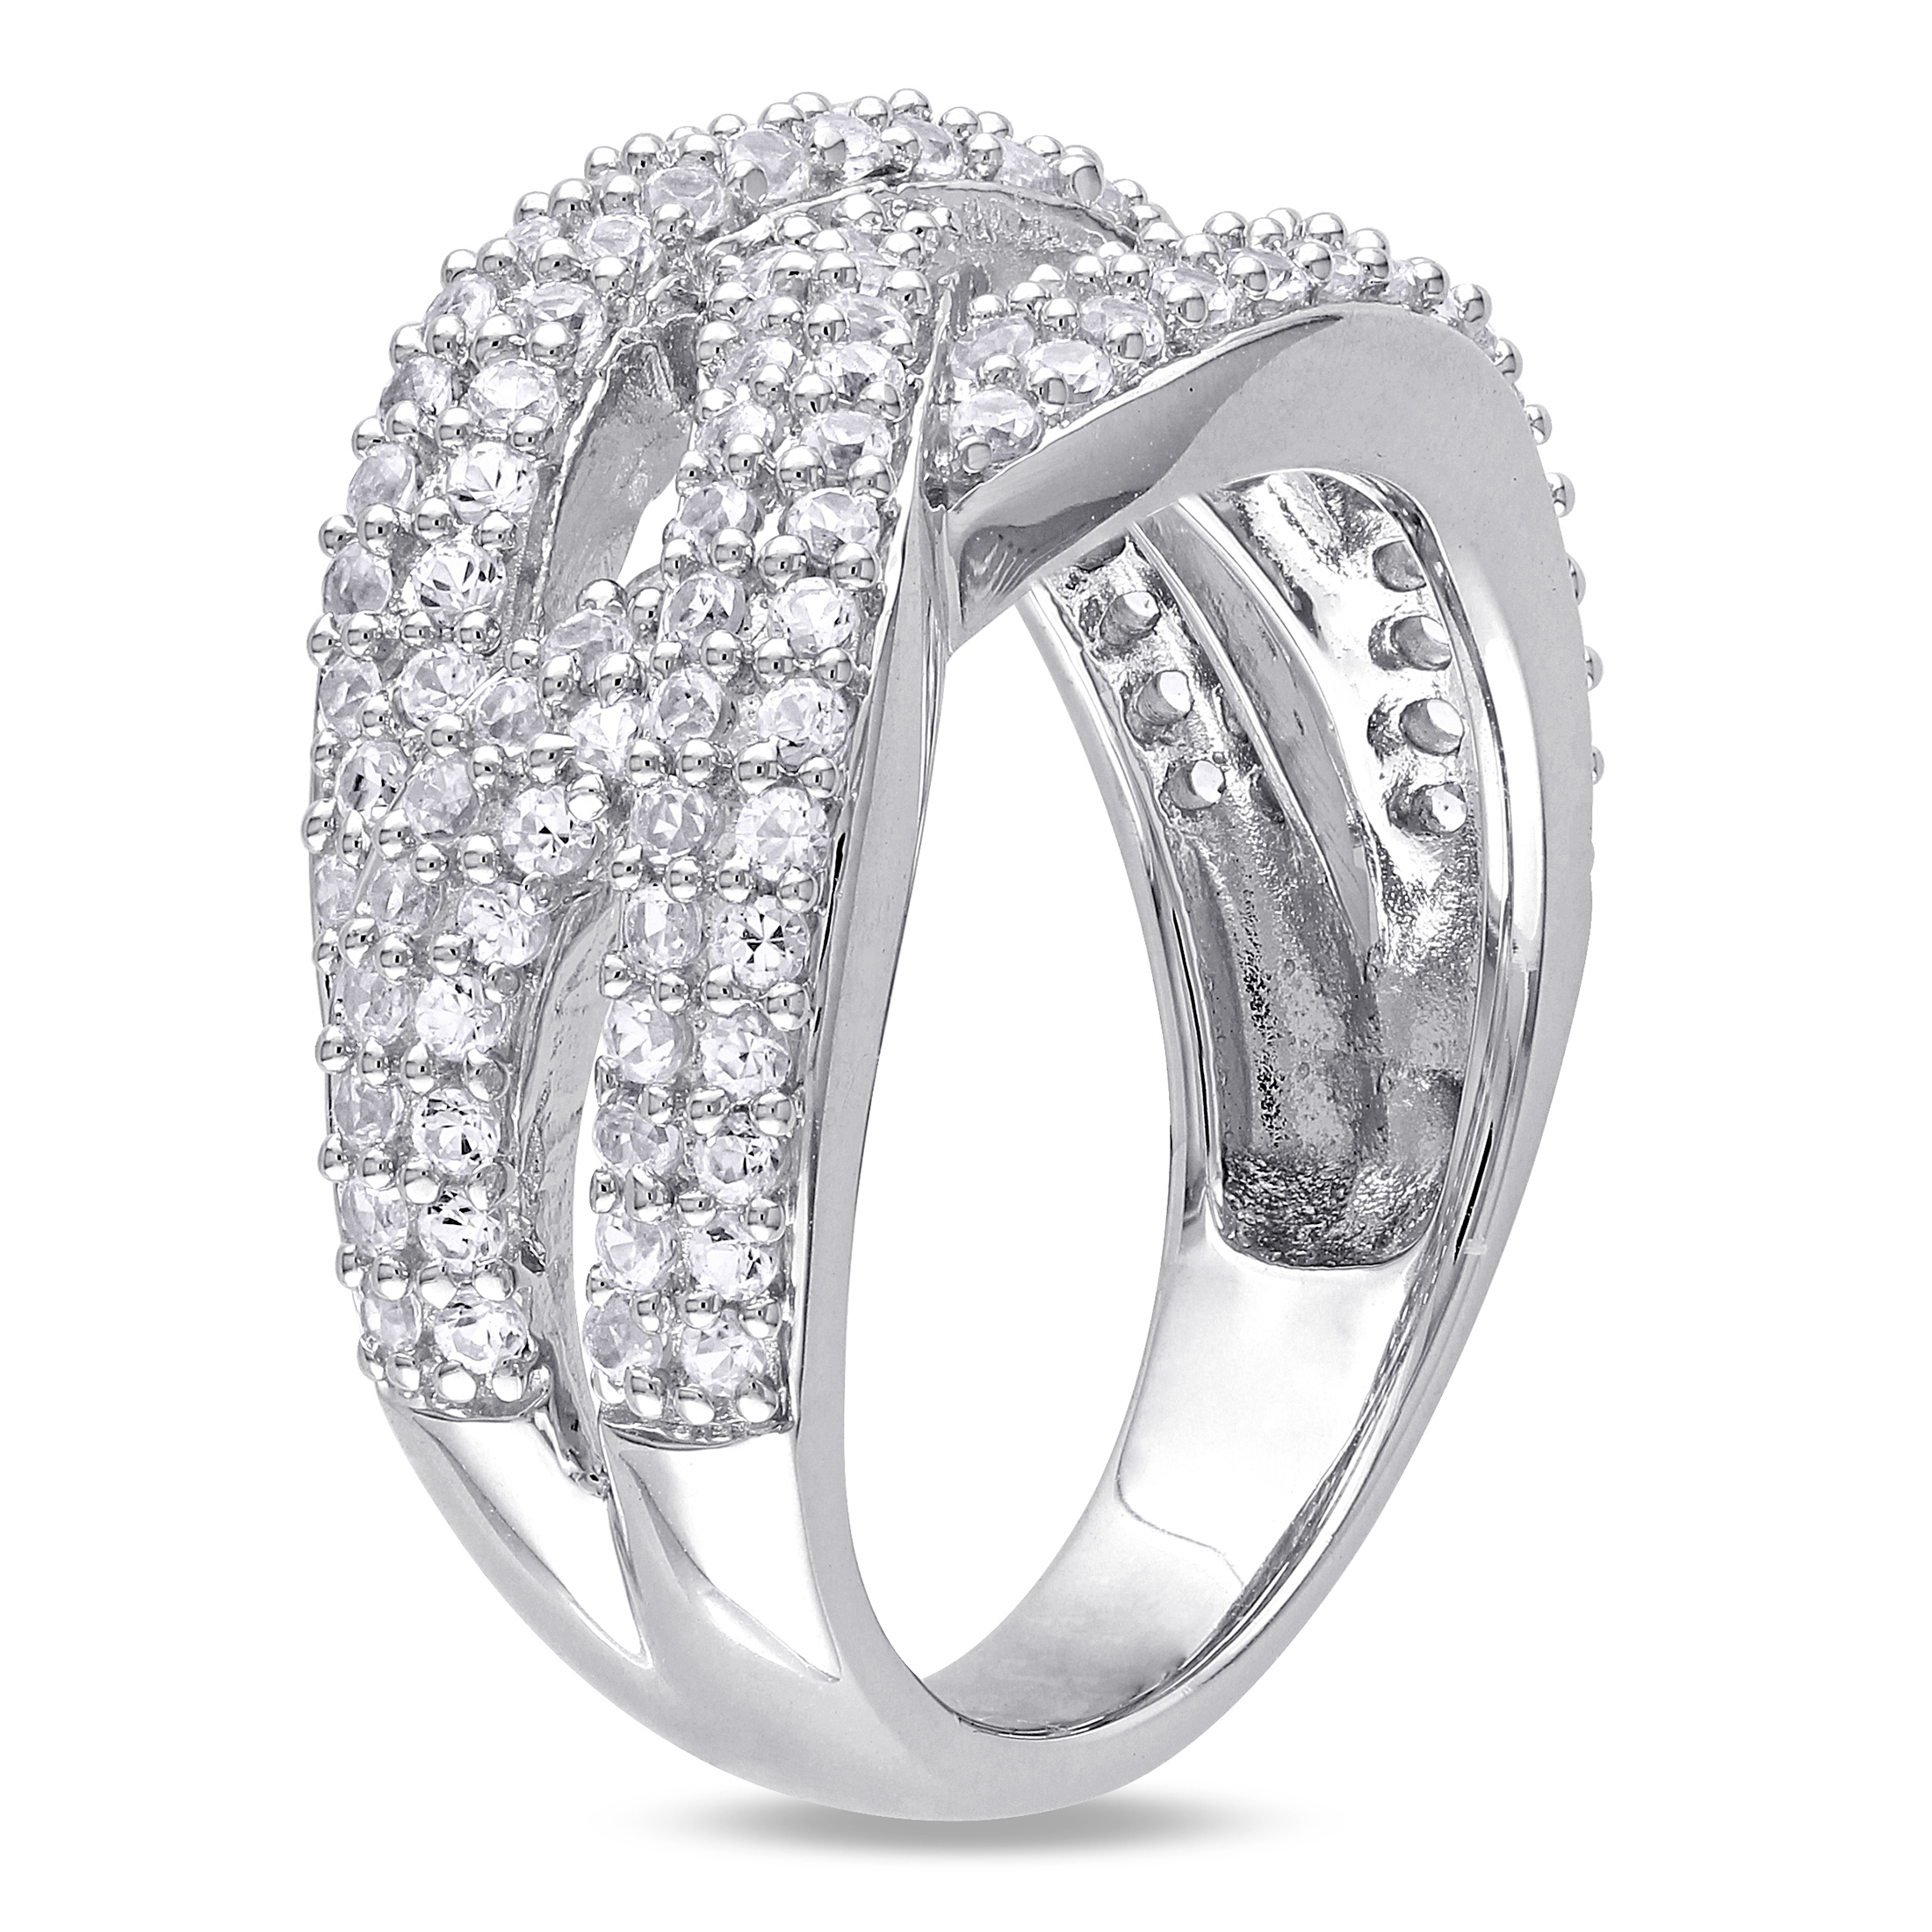 Everly Women's 1 1/4 CT T.G.W. Round-Cut Created White Sapphire Sterling Silver Multi-Row Criss Cross Ring with Prong Setting - image 4 of 7